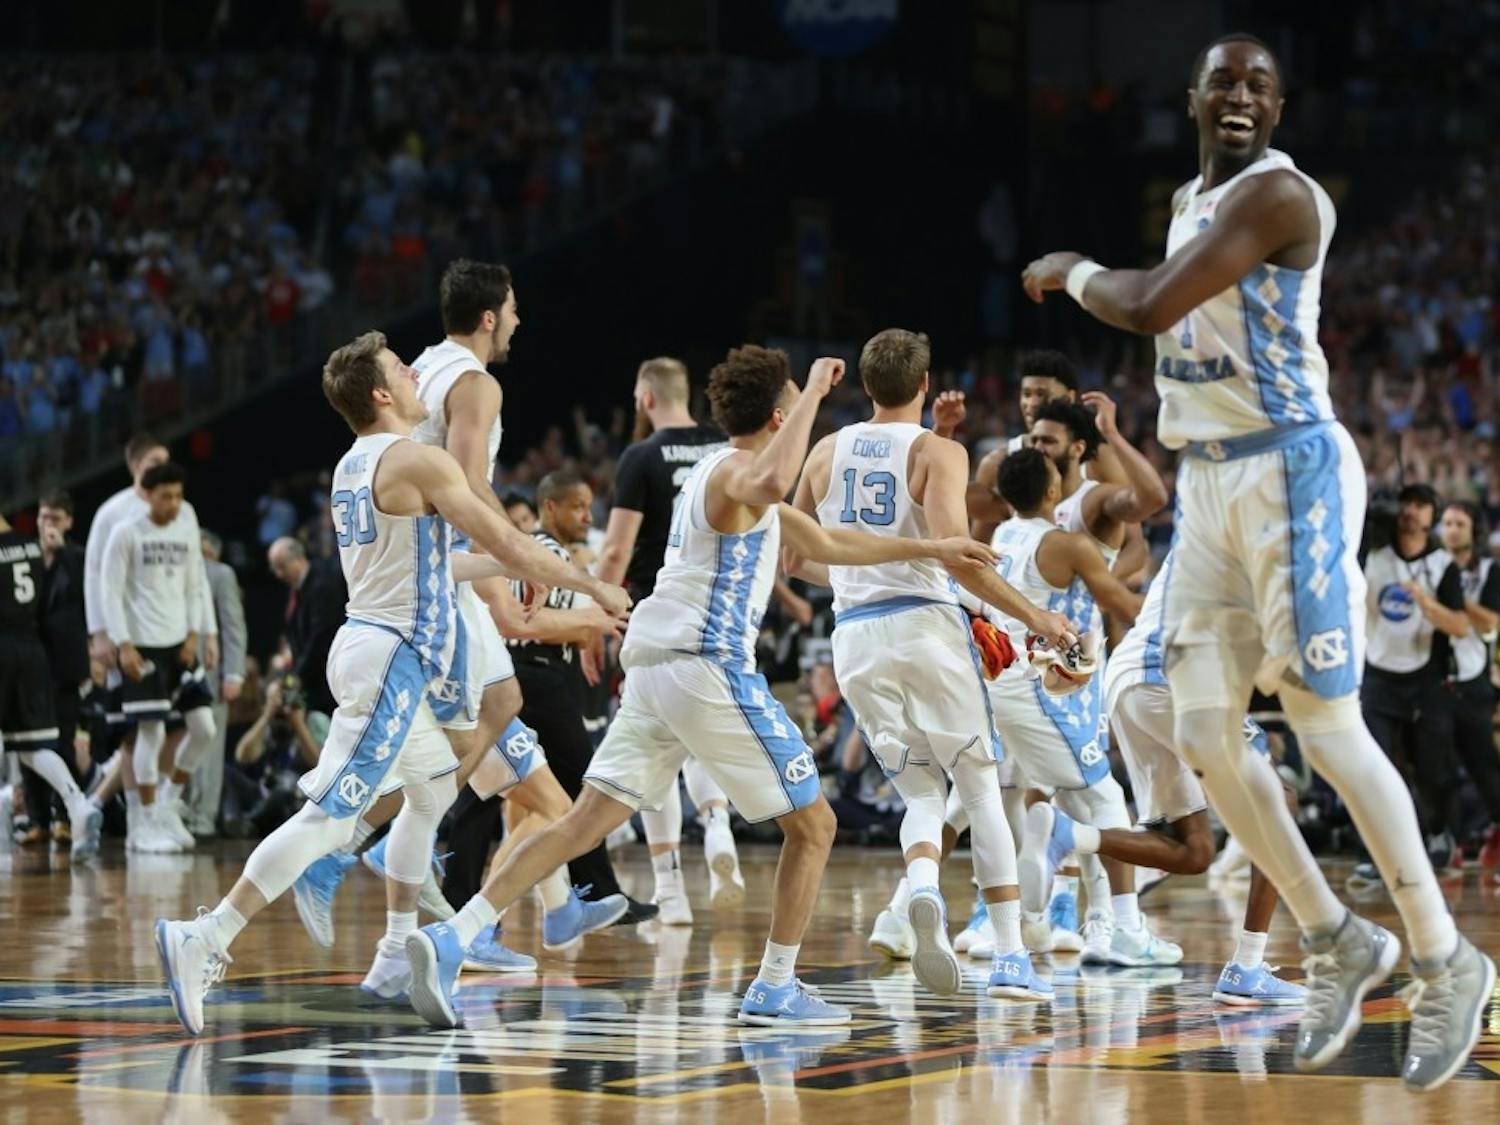 The North Carolina men's basketball team celebrates after defeating Gonzaga, 71-65, in the national championship game in April in Glendale, Ariz.